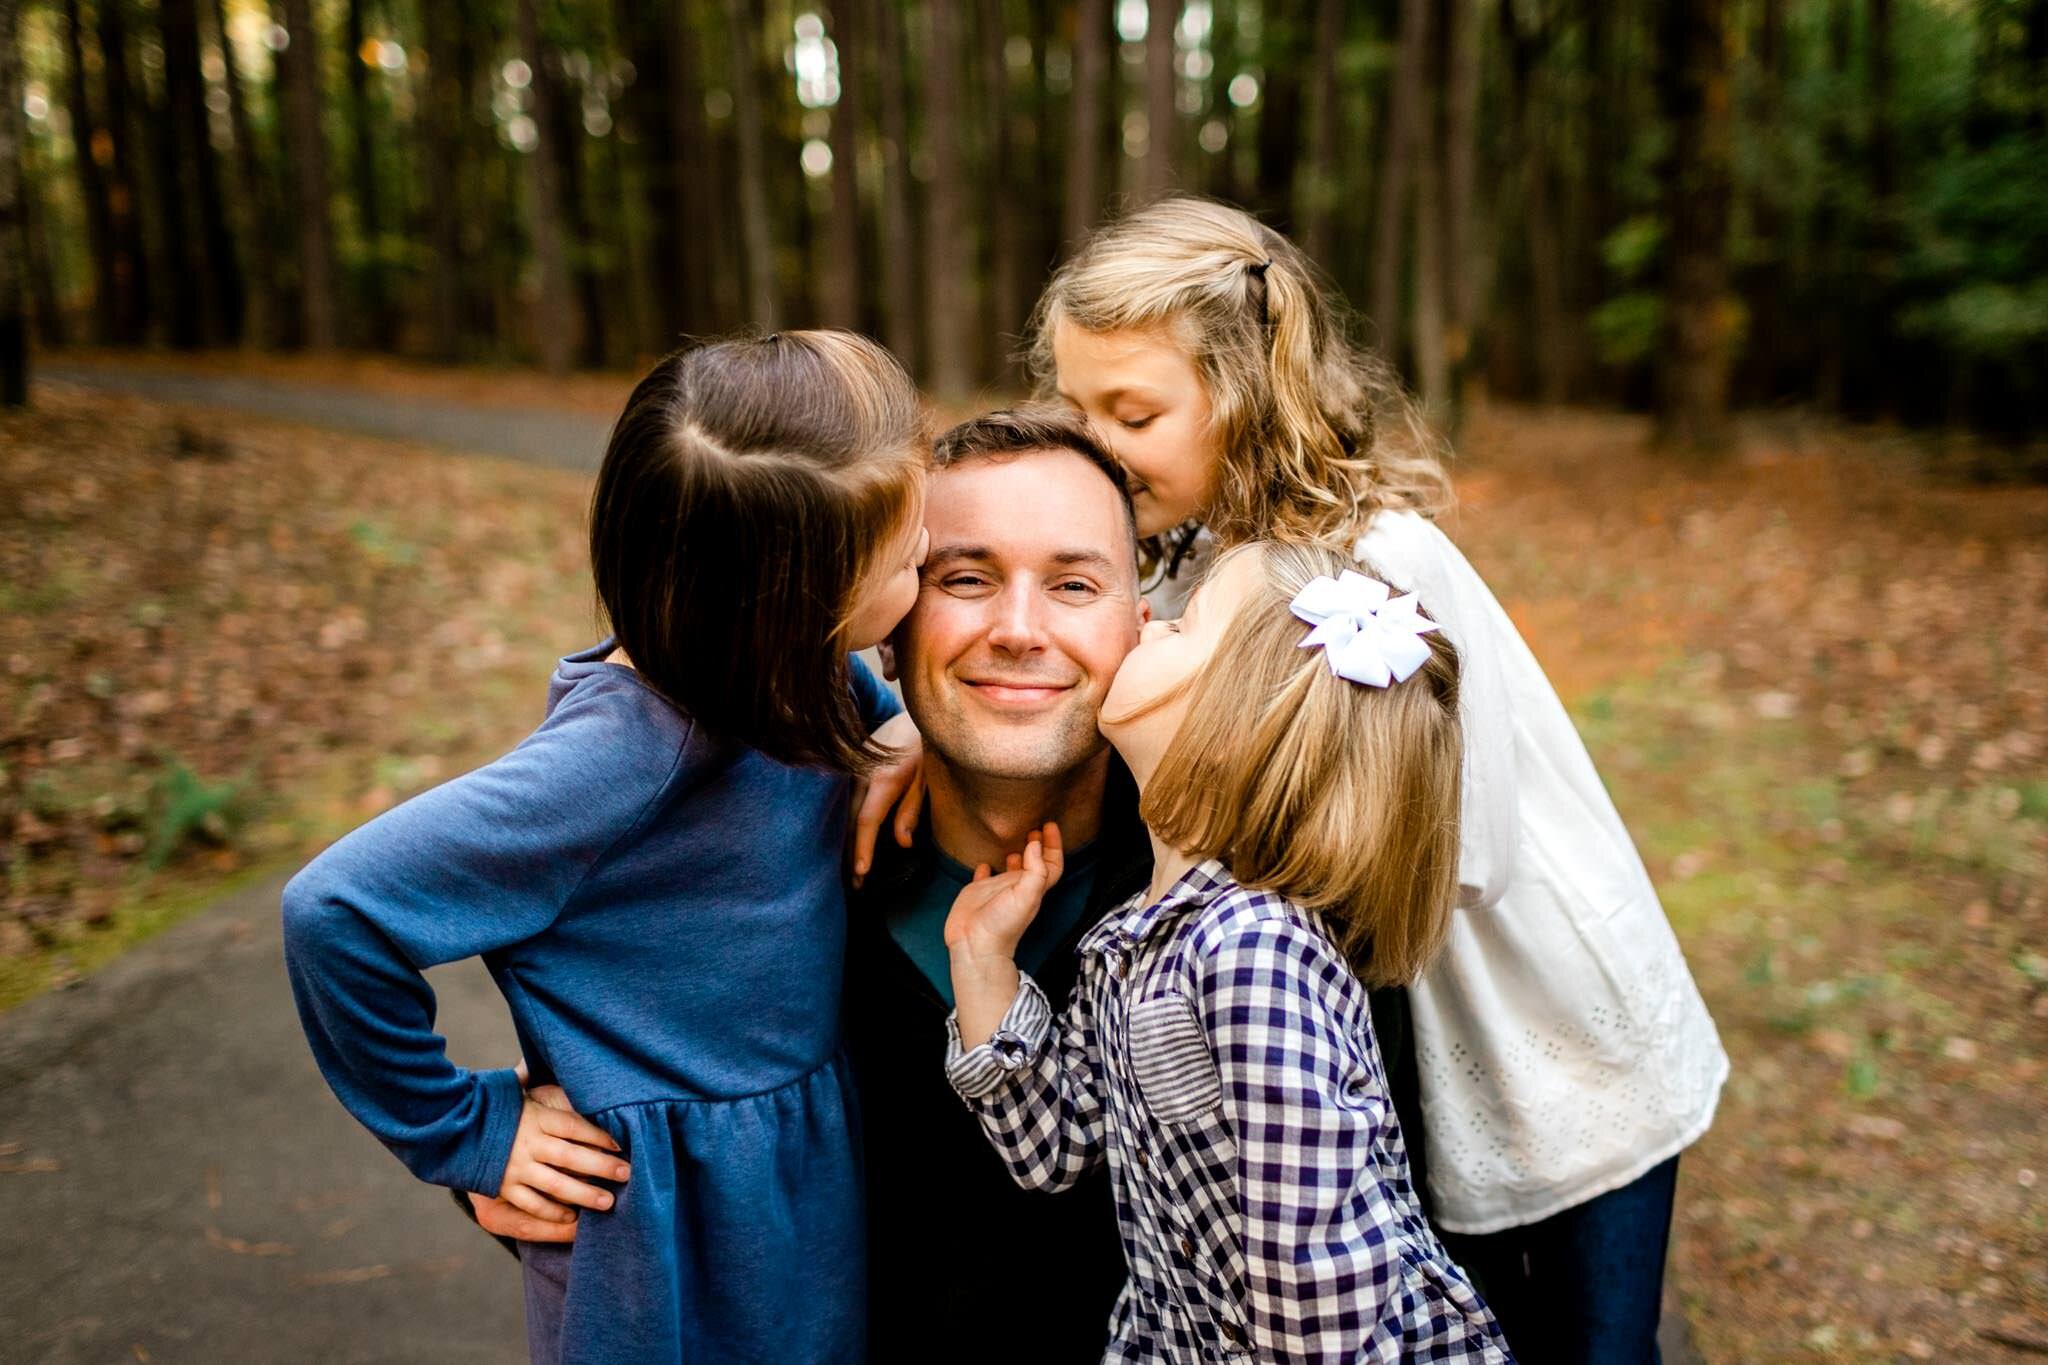 Raleigh Family Photographer | Umstead Park | By G. Lin Photography | Three girls giving dad a kiss on the cheek